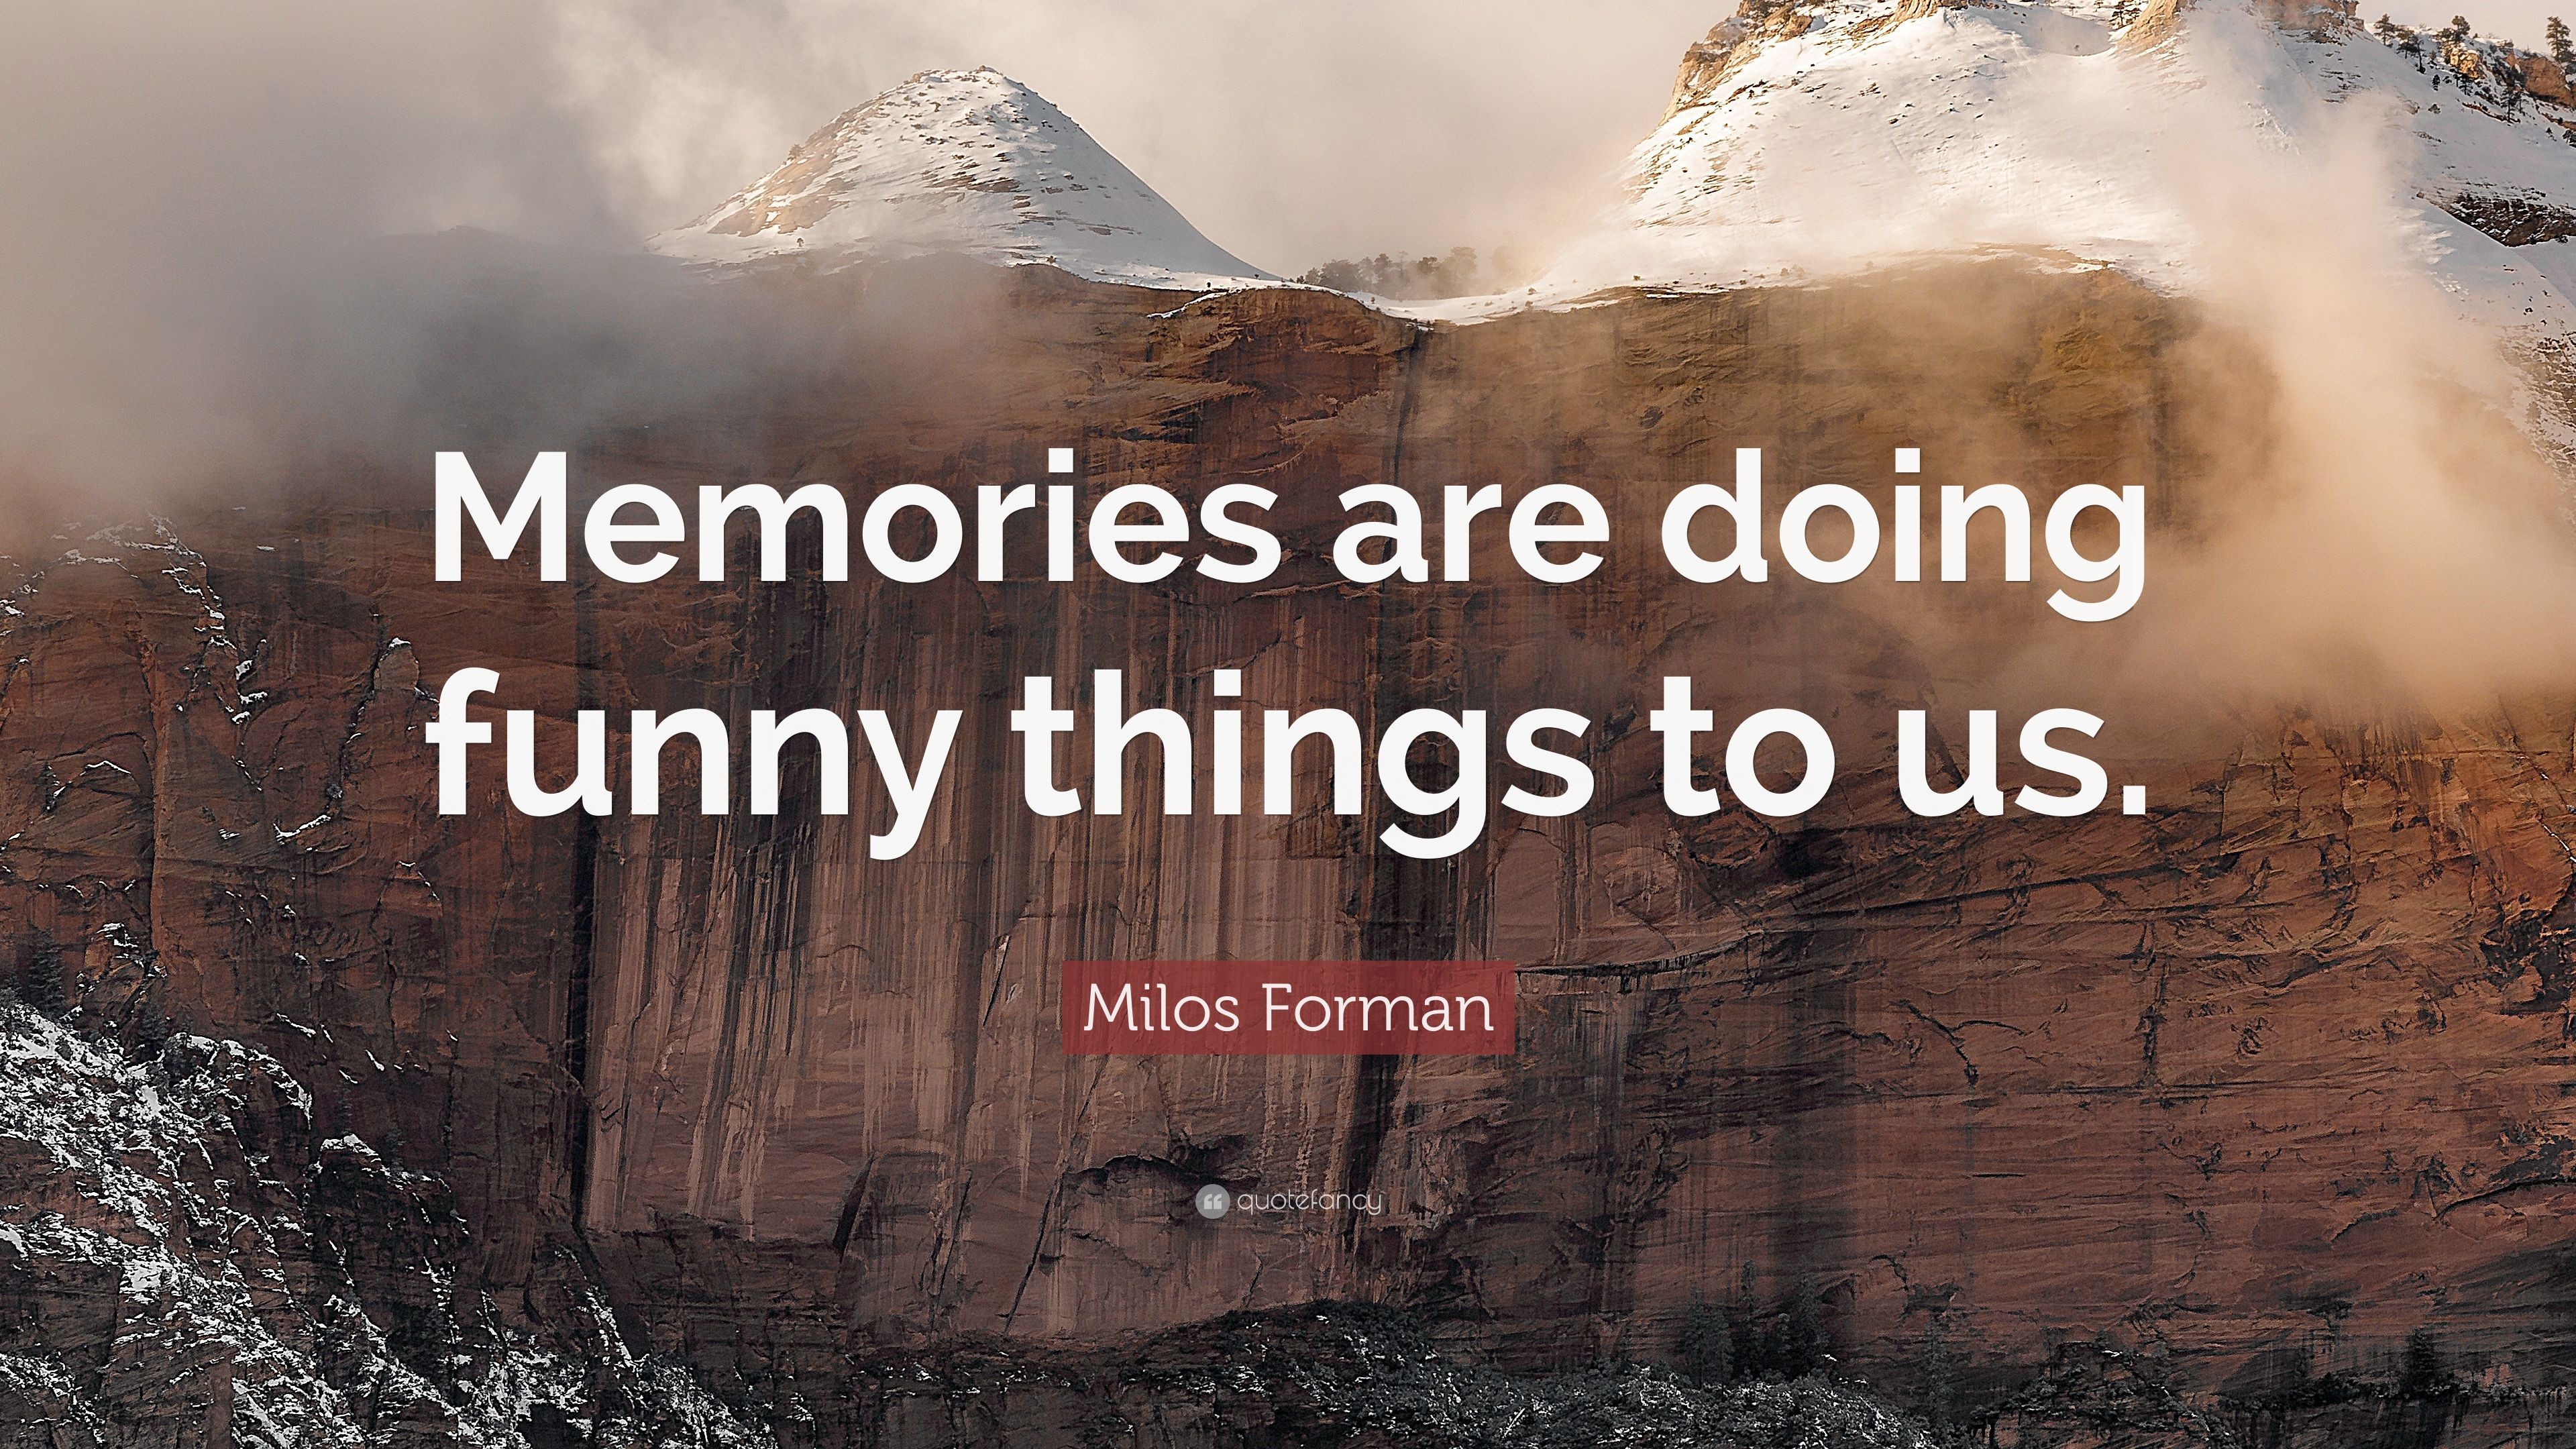 Milos Forman Quote: “Memories are doing funny things to us.” 7